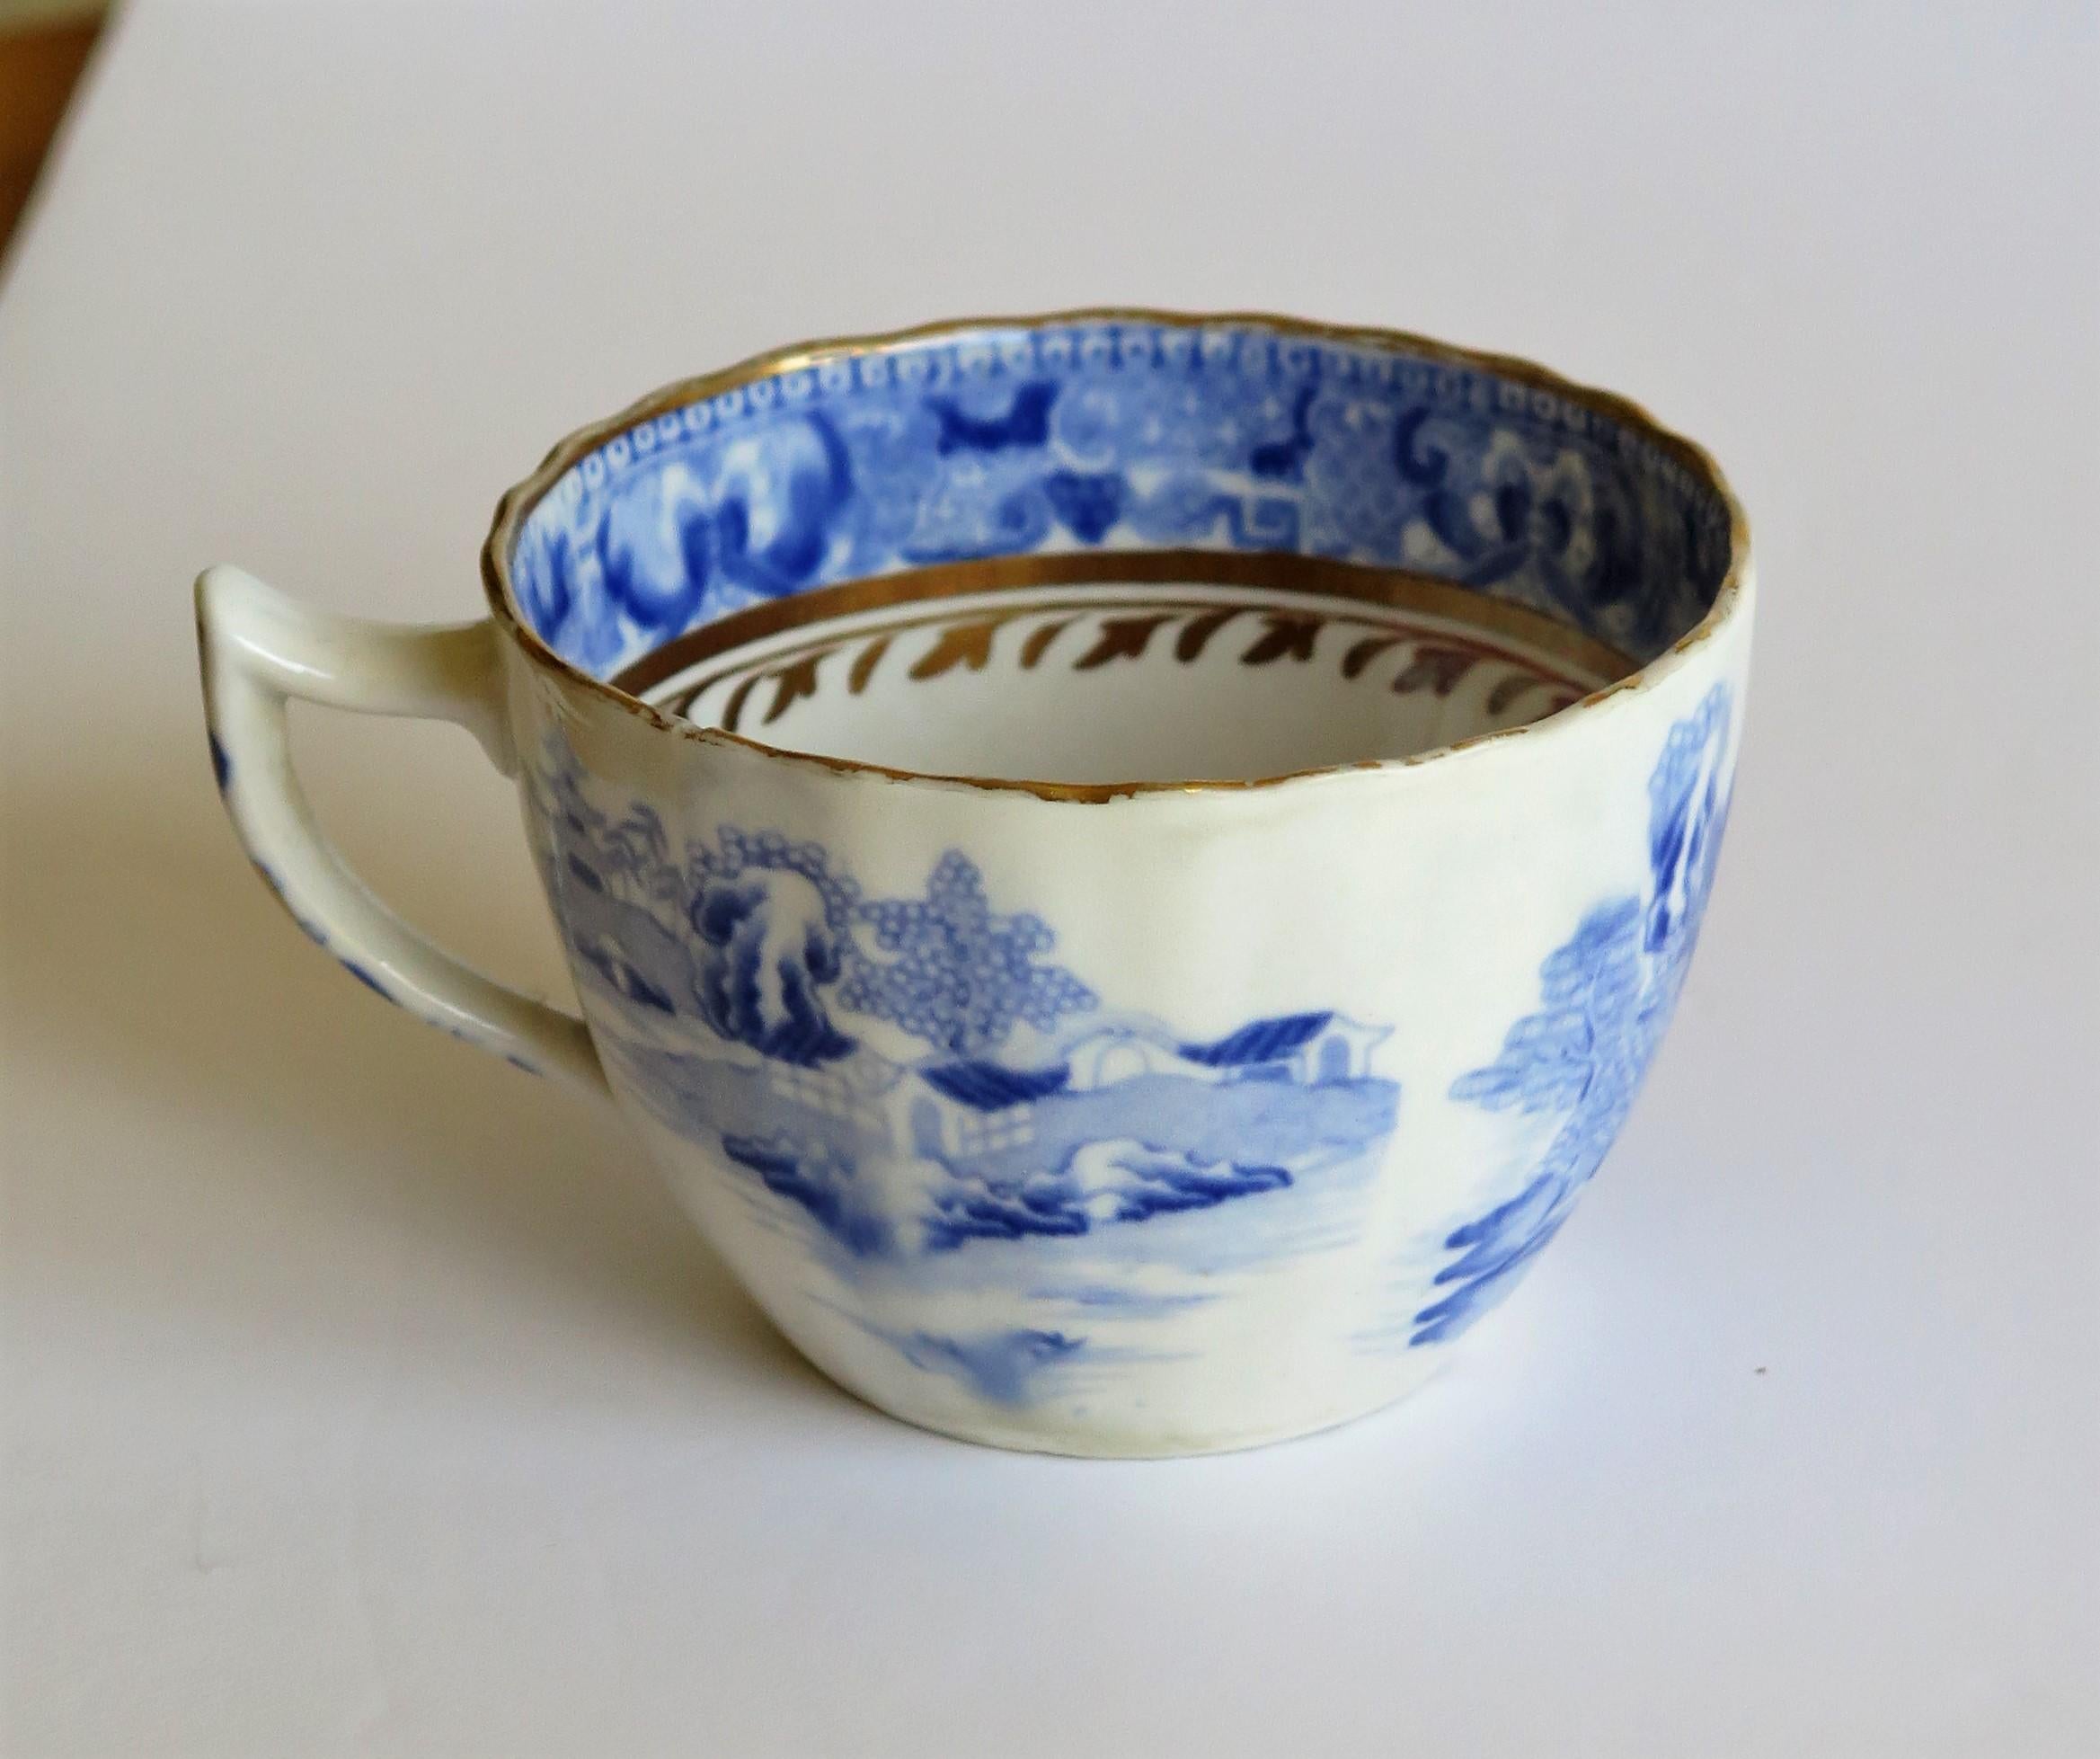 Miles Mason Porcelain Pair of Tea Cups Broseley Blue and White Pattern, Ca. 1805 For Sale 1